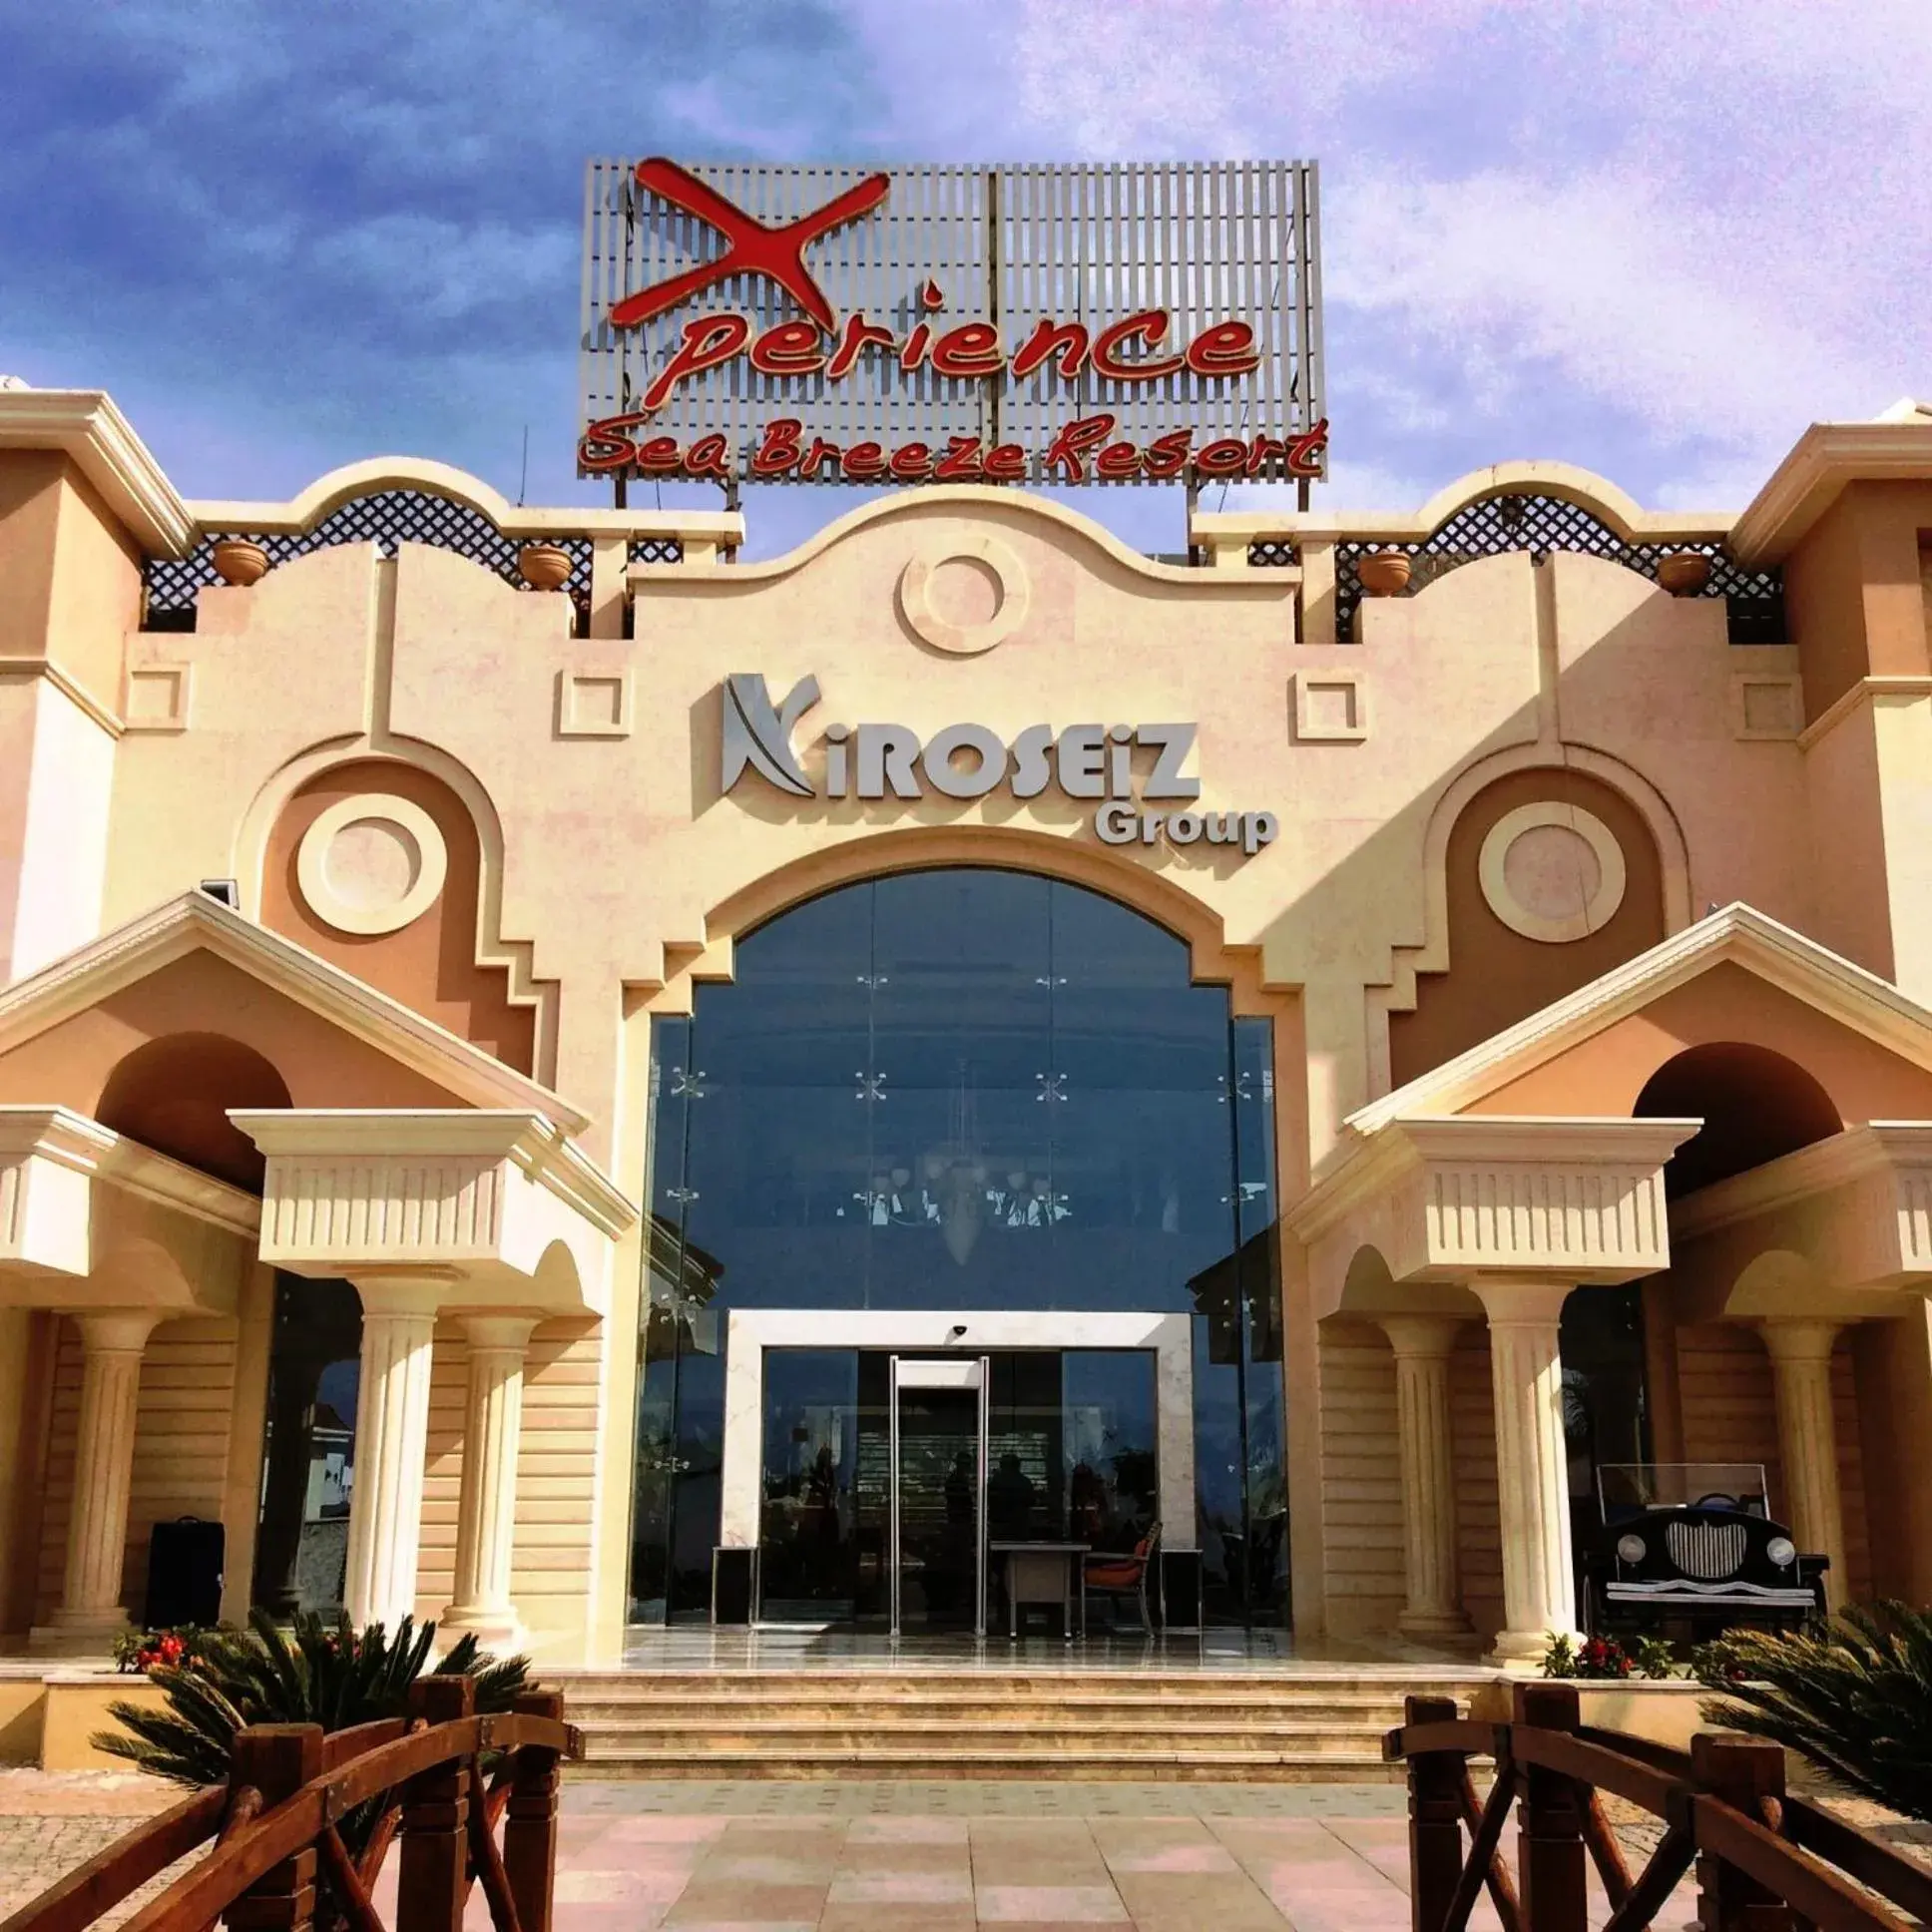 Property logo or sign in Xperience Sea Breeze Resort